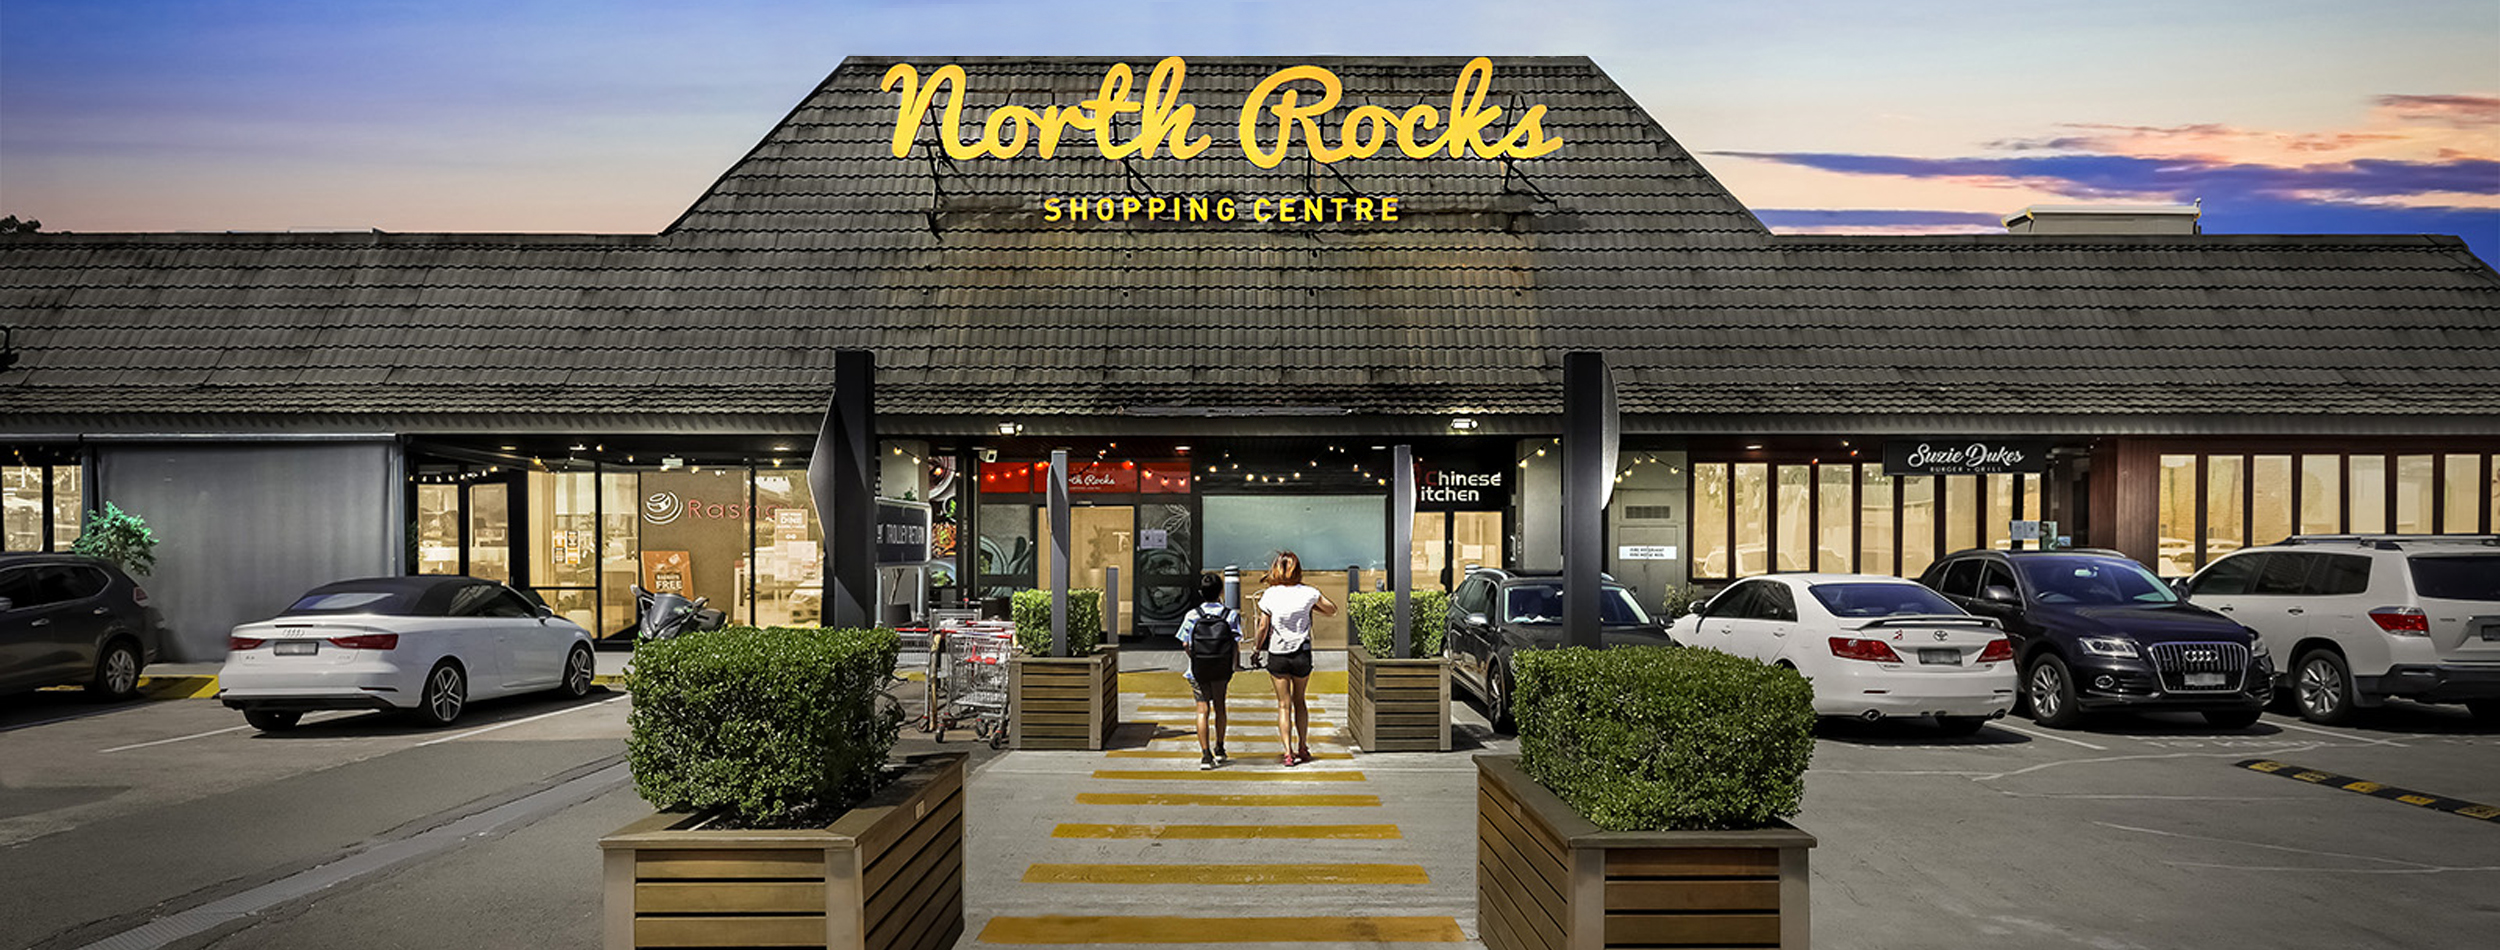 North Rocks Shopping - Retail & Commercial Development